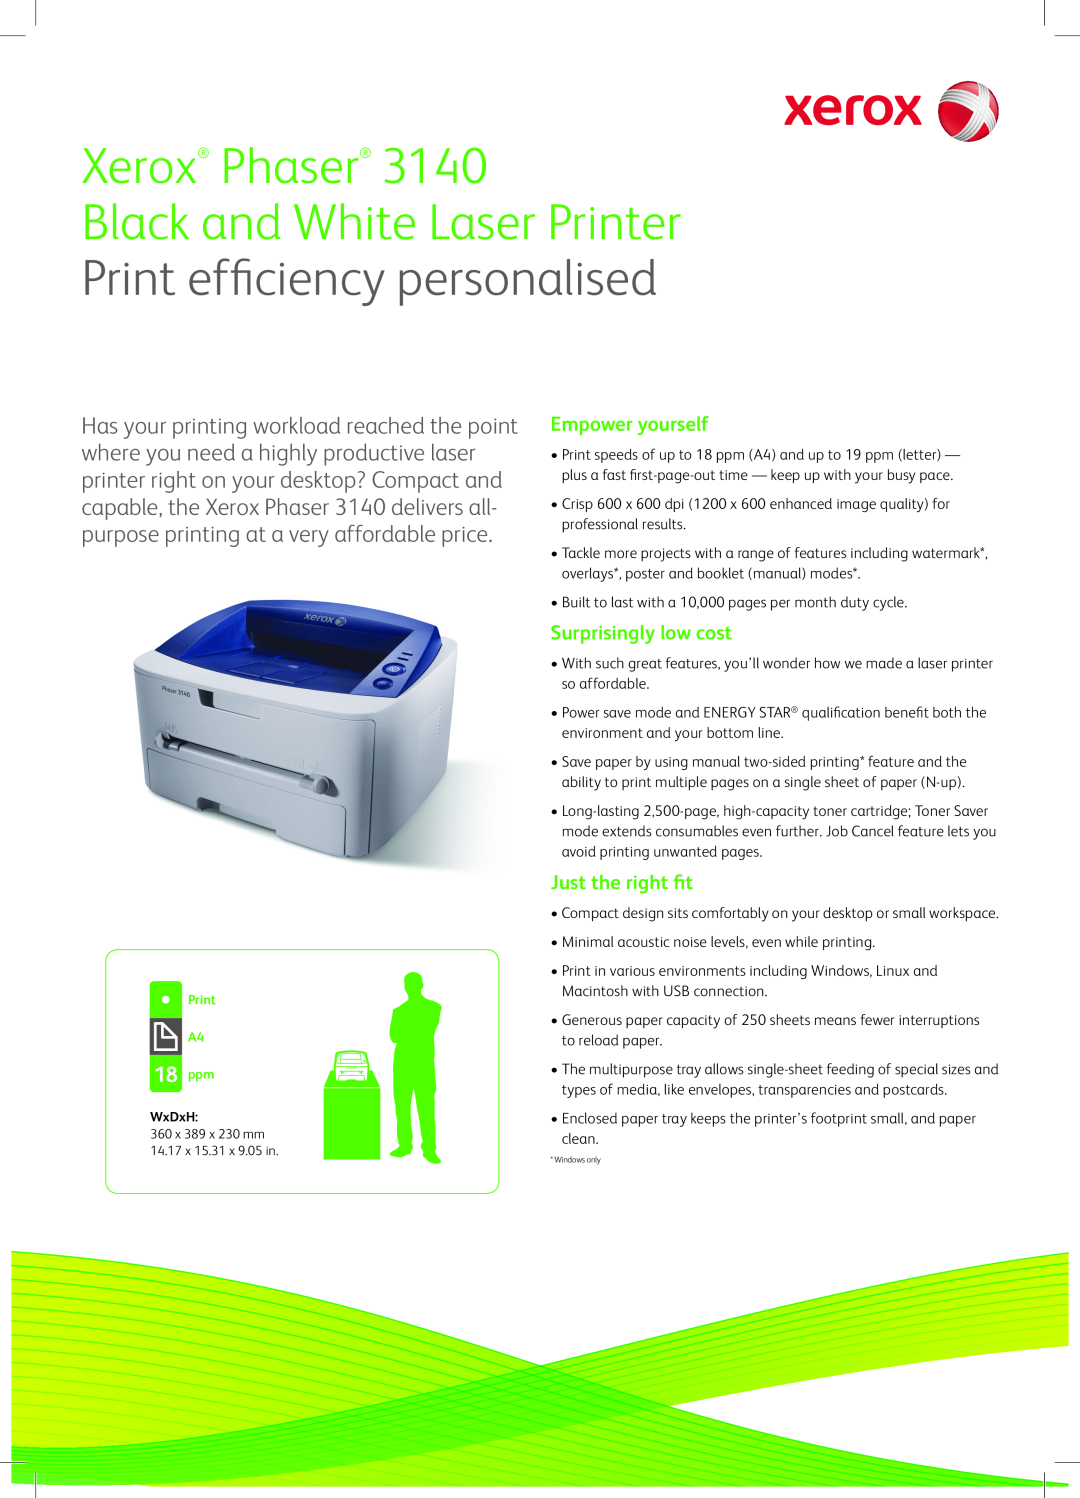 Xerox 3140 manual Xerox Phaser, 18 ppm, Empower yourself, Surprisingly low cost, Just the right ﬁt 